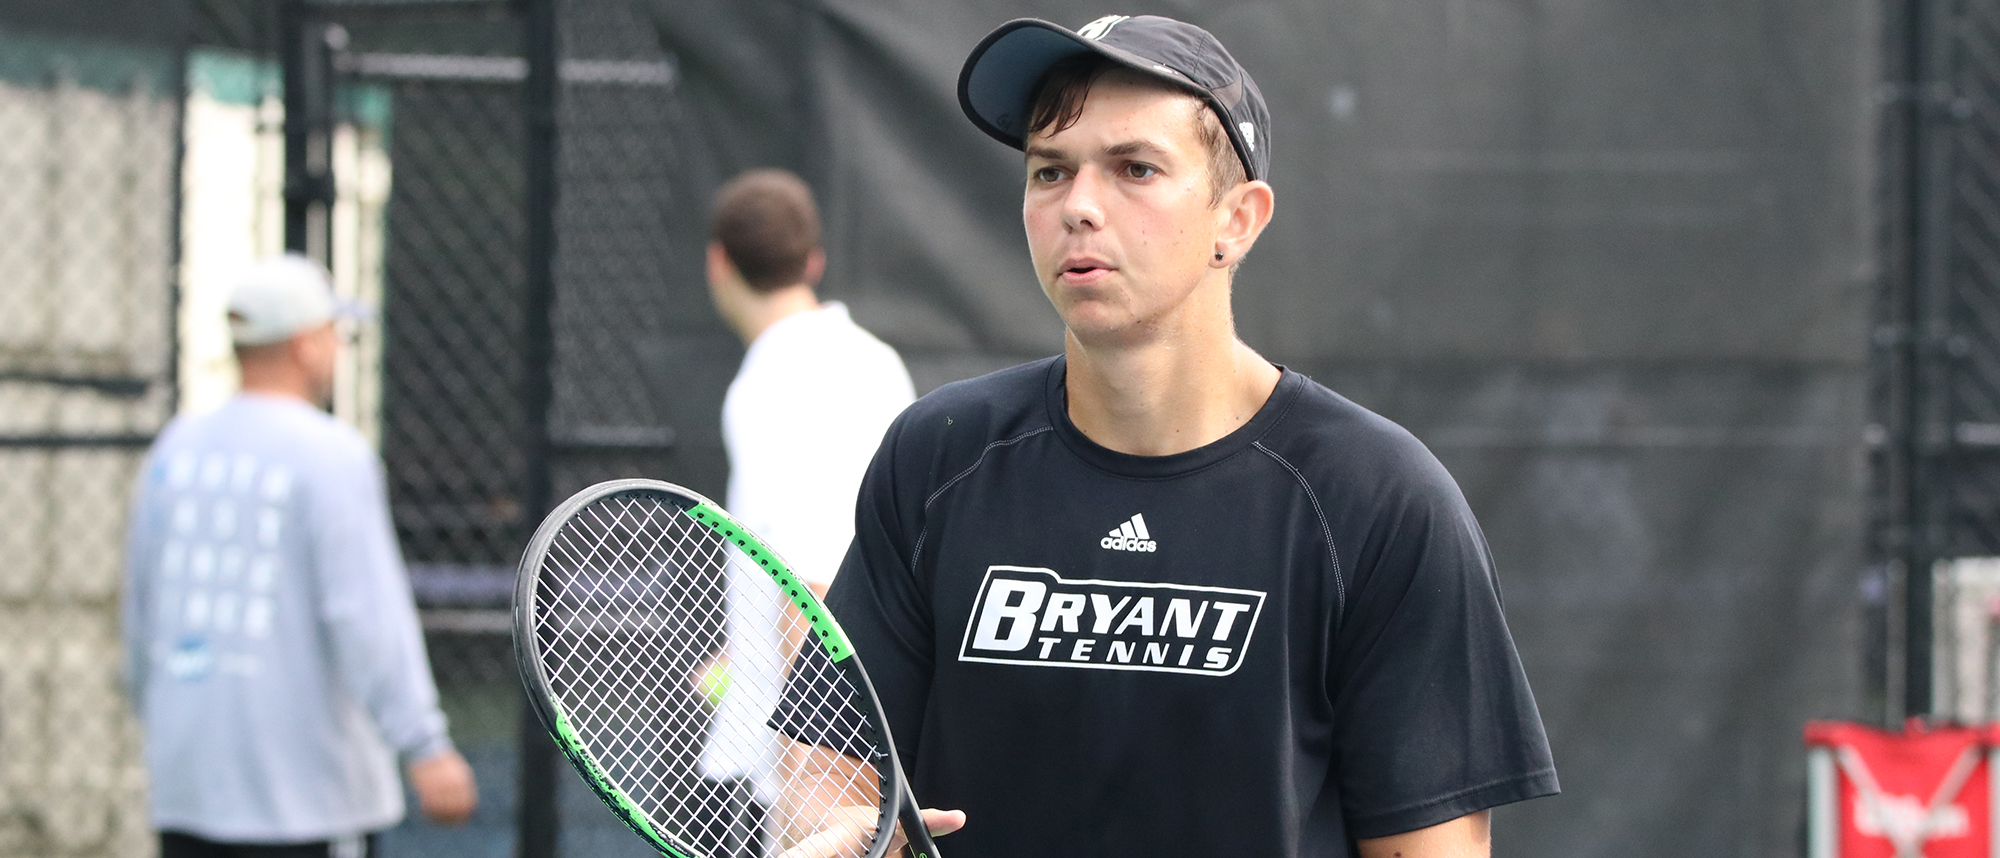 Argentini set to compete in Oracle ITA Masters